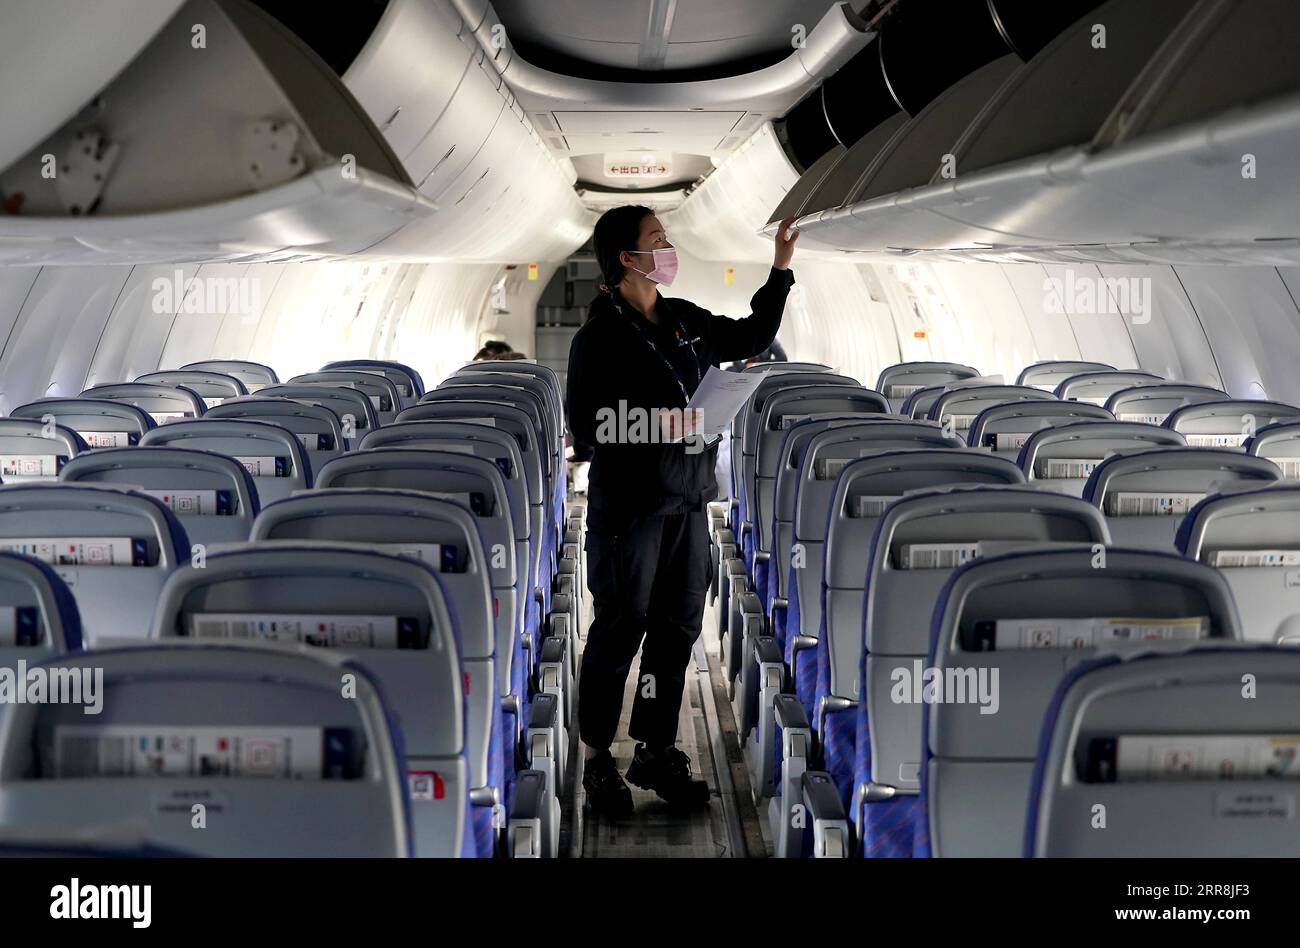 210510 -- ZHENGZHOU, May 10, 2021 -- Liu Qiqi checks luggage rack of an airplane at a maintenance base of the Henan branch of China Southern Airlines in Zhengzhou, central China s Henan Province, April 30, 2021. Liu Qiqi is a 24-year-old mechanic in Henan branch of China Southern Airlines. Graduating from Civil Aviation University of China in 2019, Liu Qiqi is eye-catching in the team, for she is the only female mechanic in the nearly 200-strong maintenance workforce. Working in a traditionally male-dominated industry, Liu was questioned a lot when she entered the profession. The job requires Stock Photo